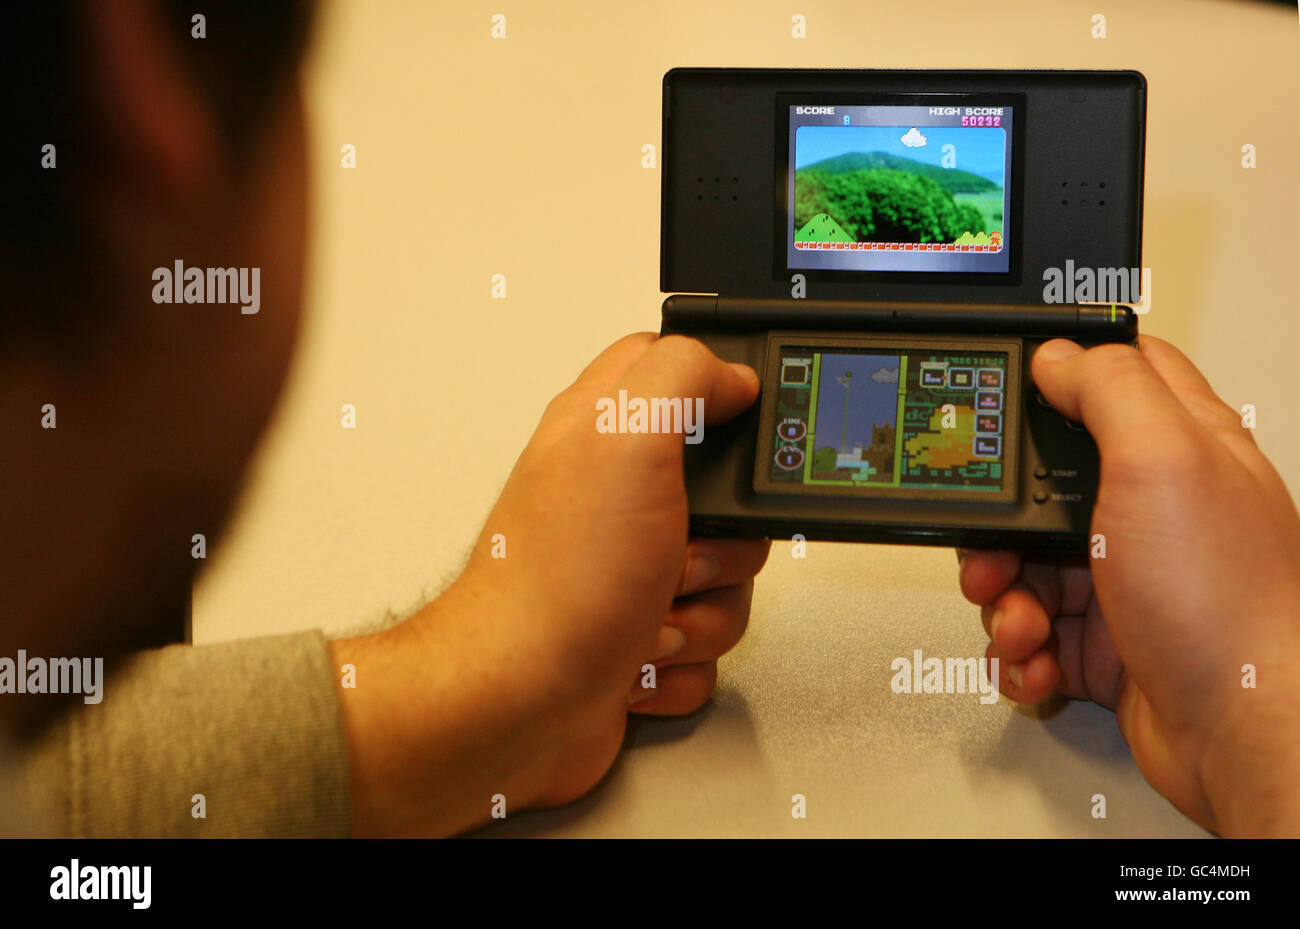 Computer game stock. A man plays a game on a Nintendo DS console. Stock Photo